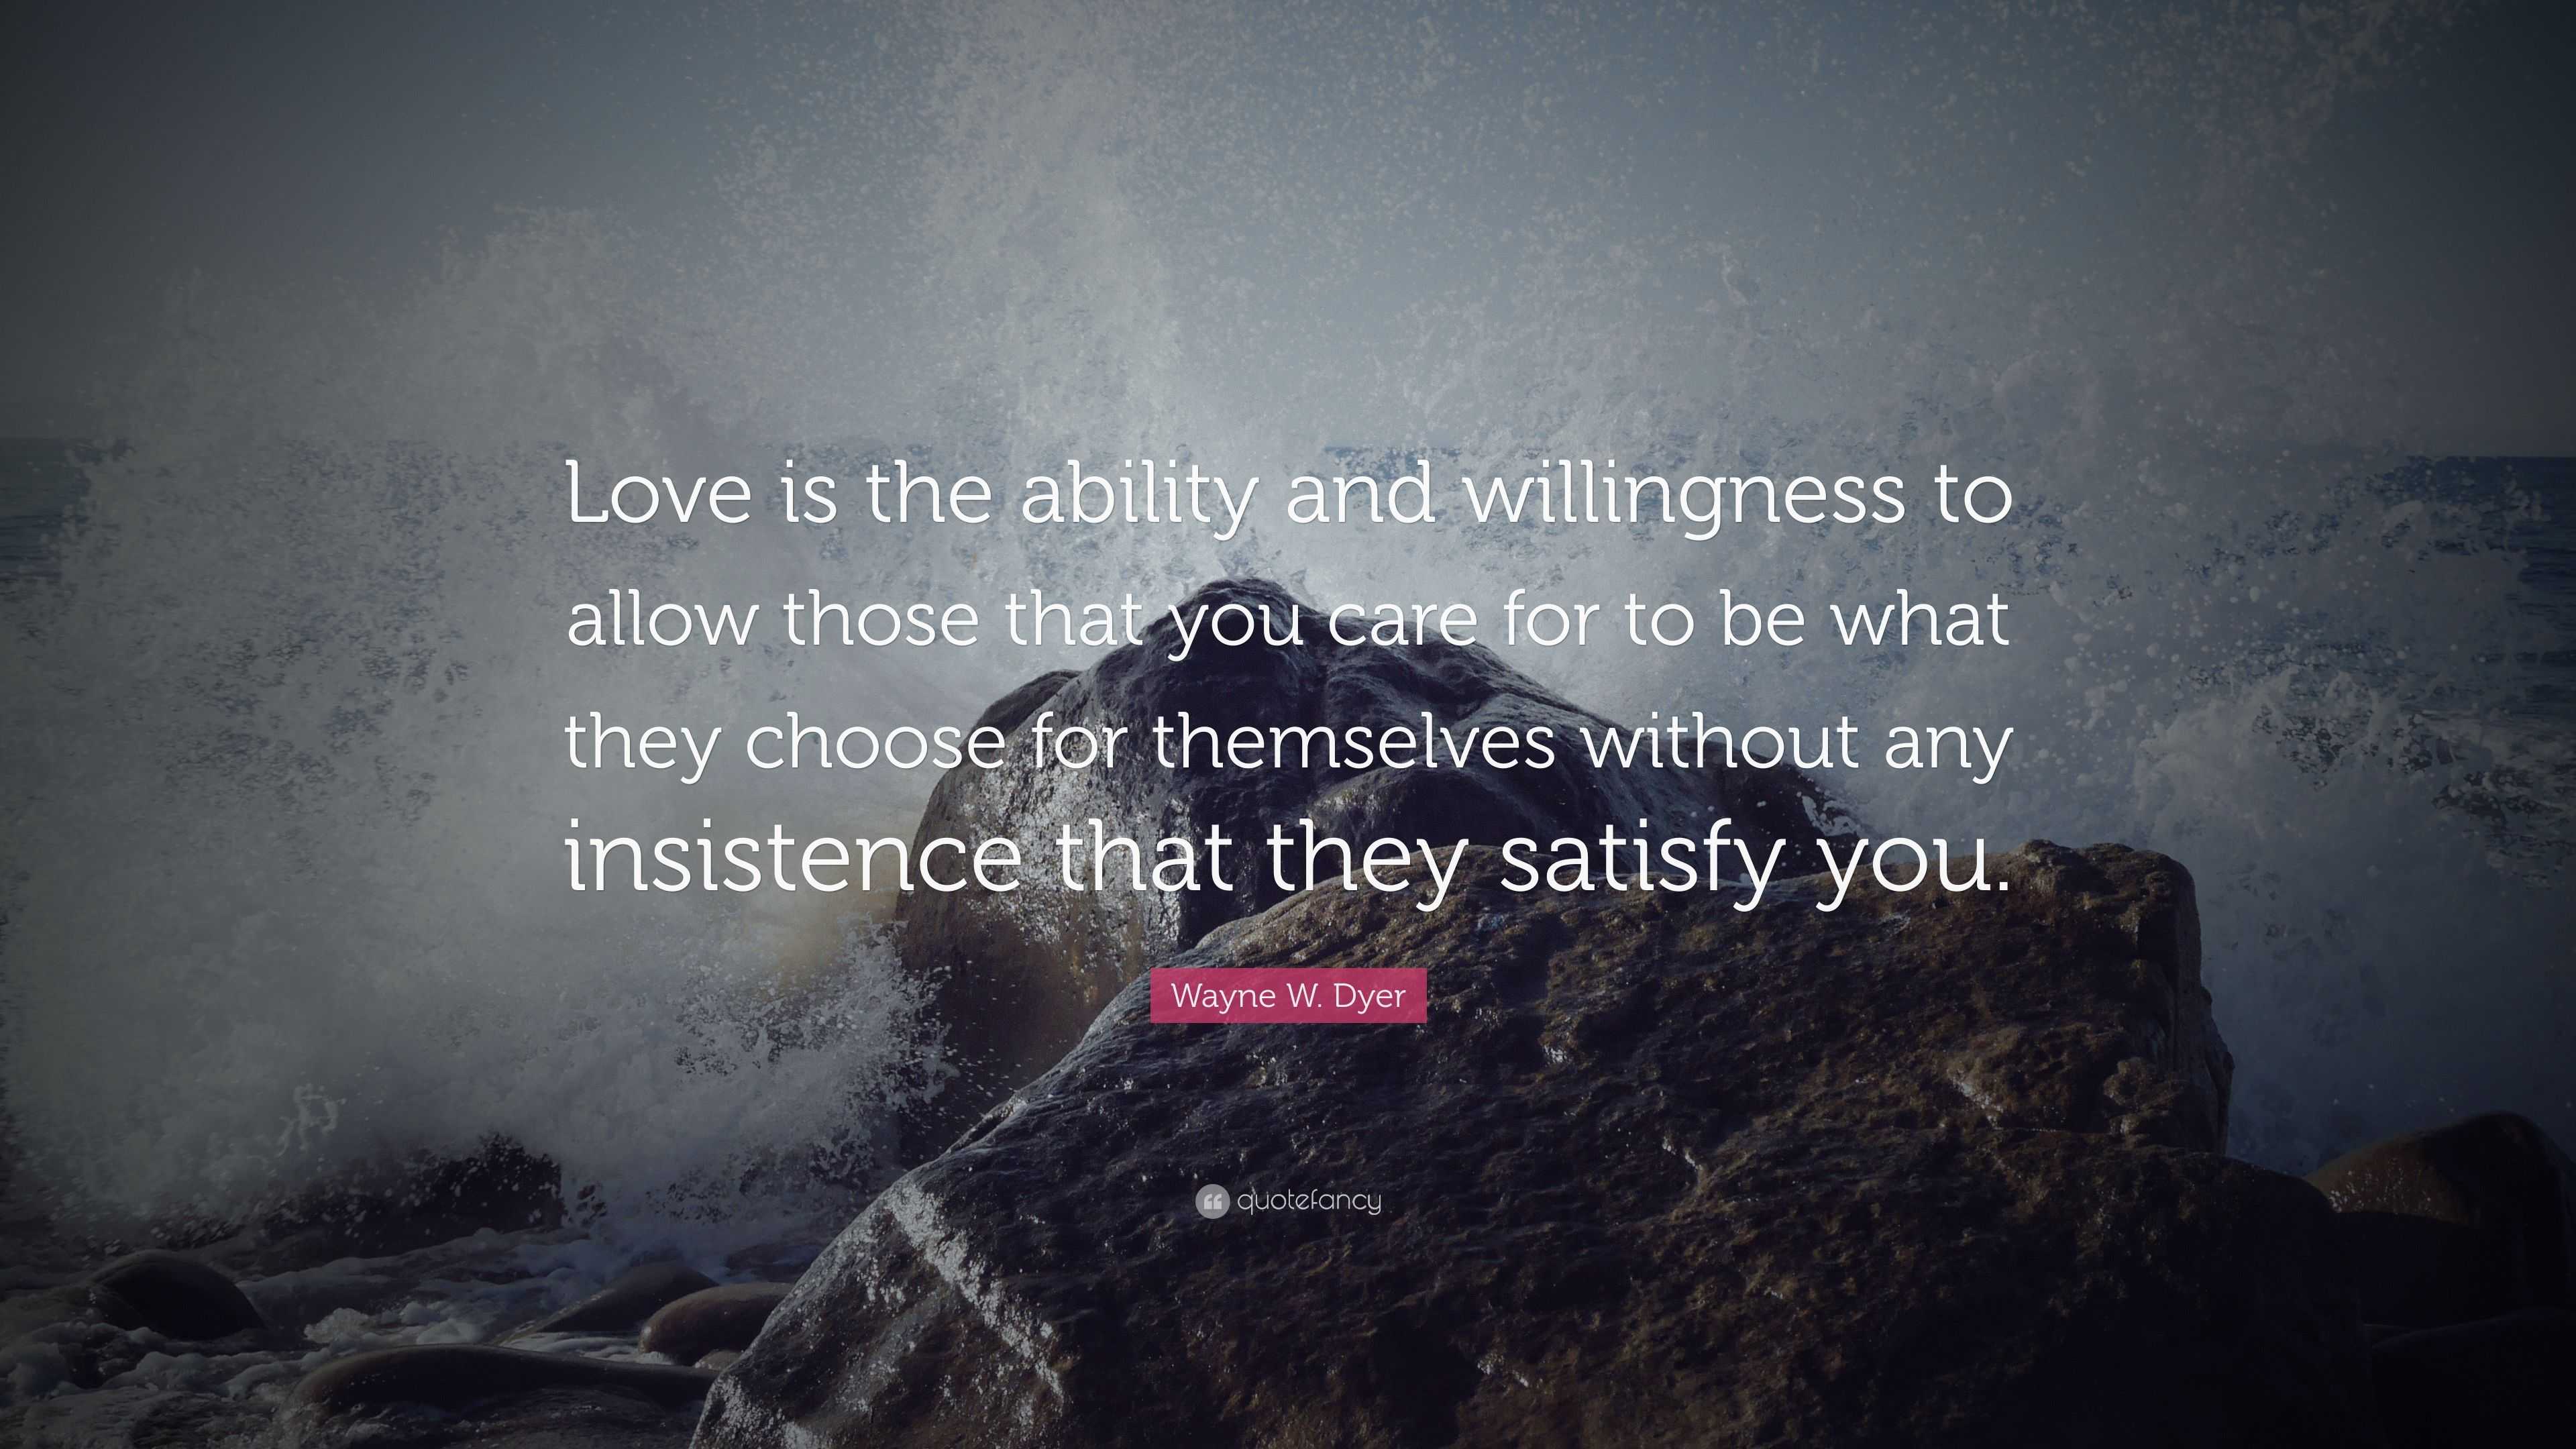 Wayne W. Dyer Quote: “Love is the ability and willingness to allow ...